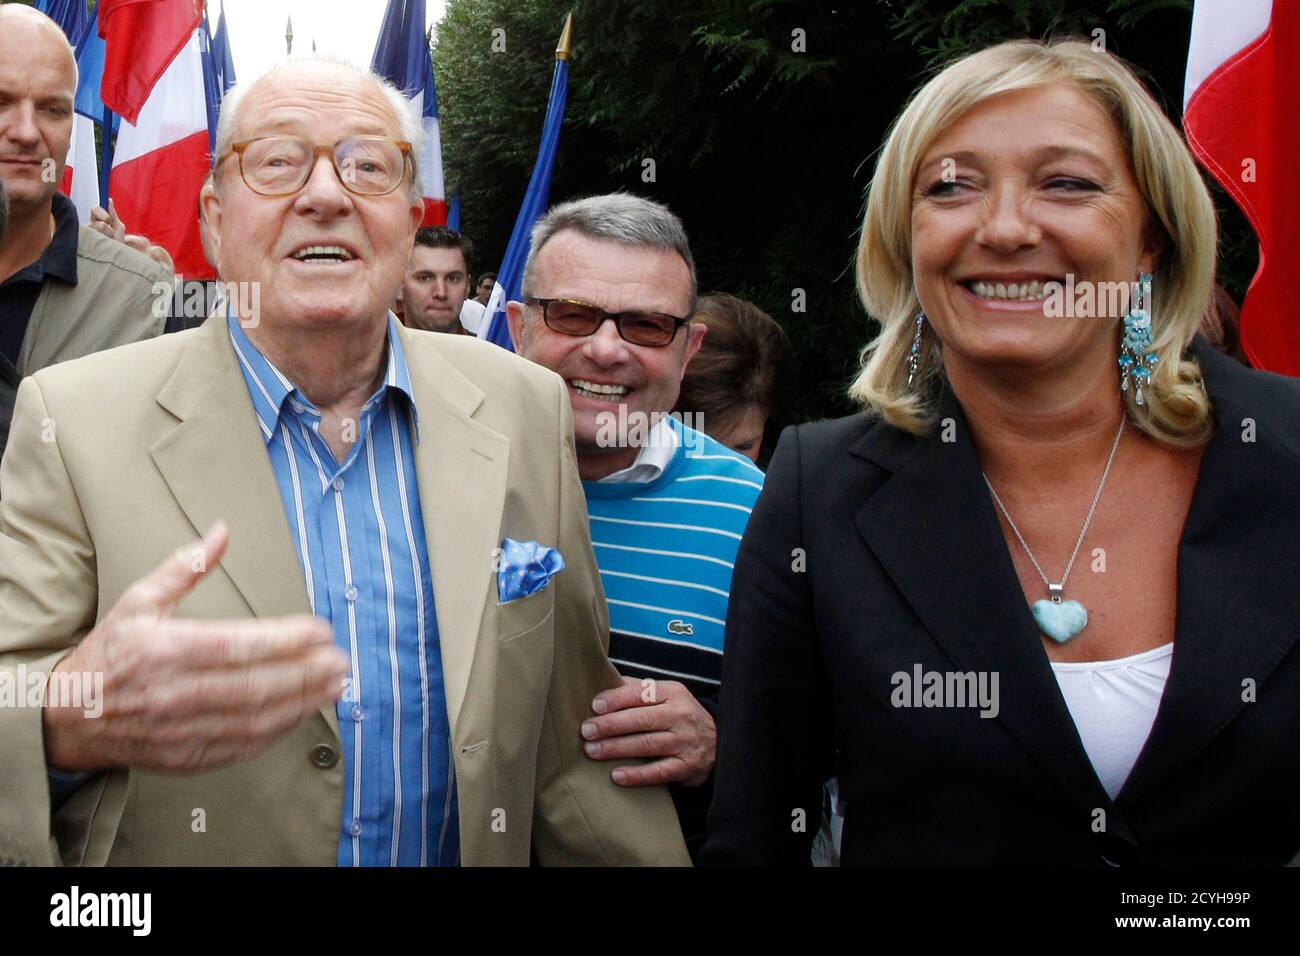 Jean-Marie Le Pen, France's far-right National Front political party  leader, arrives with his daughter Marine Le Pen (R) for a meeting in  Cormont, northern France, August 29 2010. REUTERS/Pascal Rossignol (FRANCE -